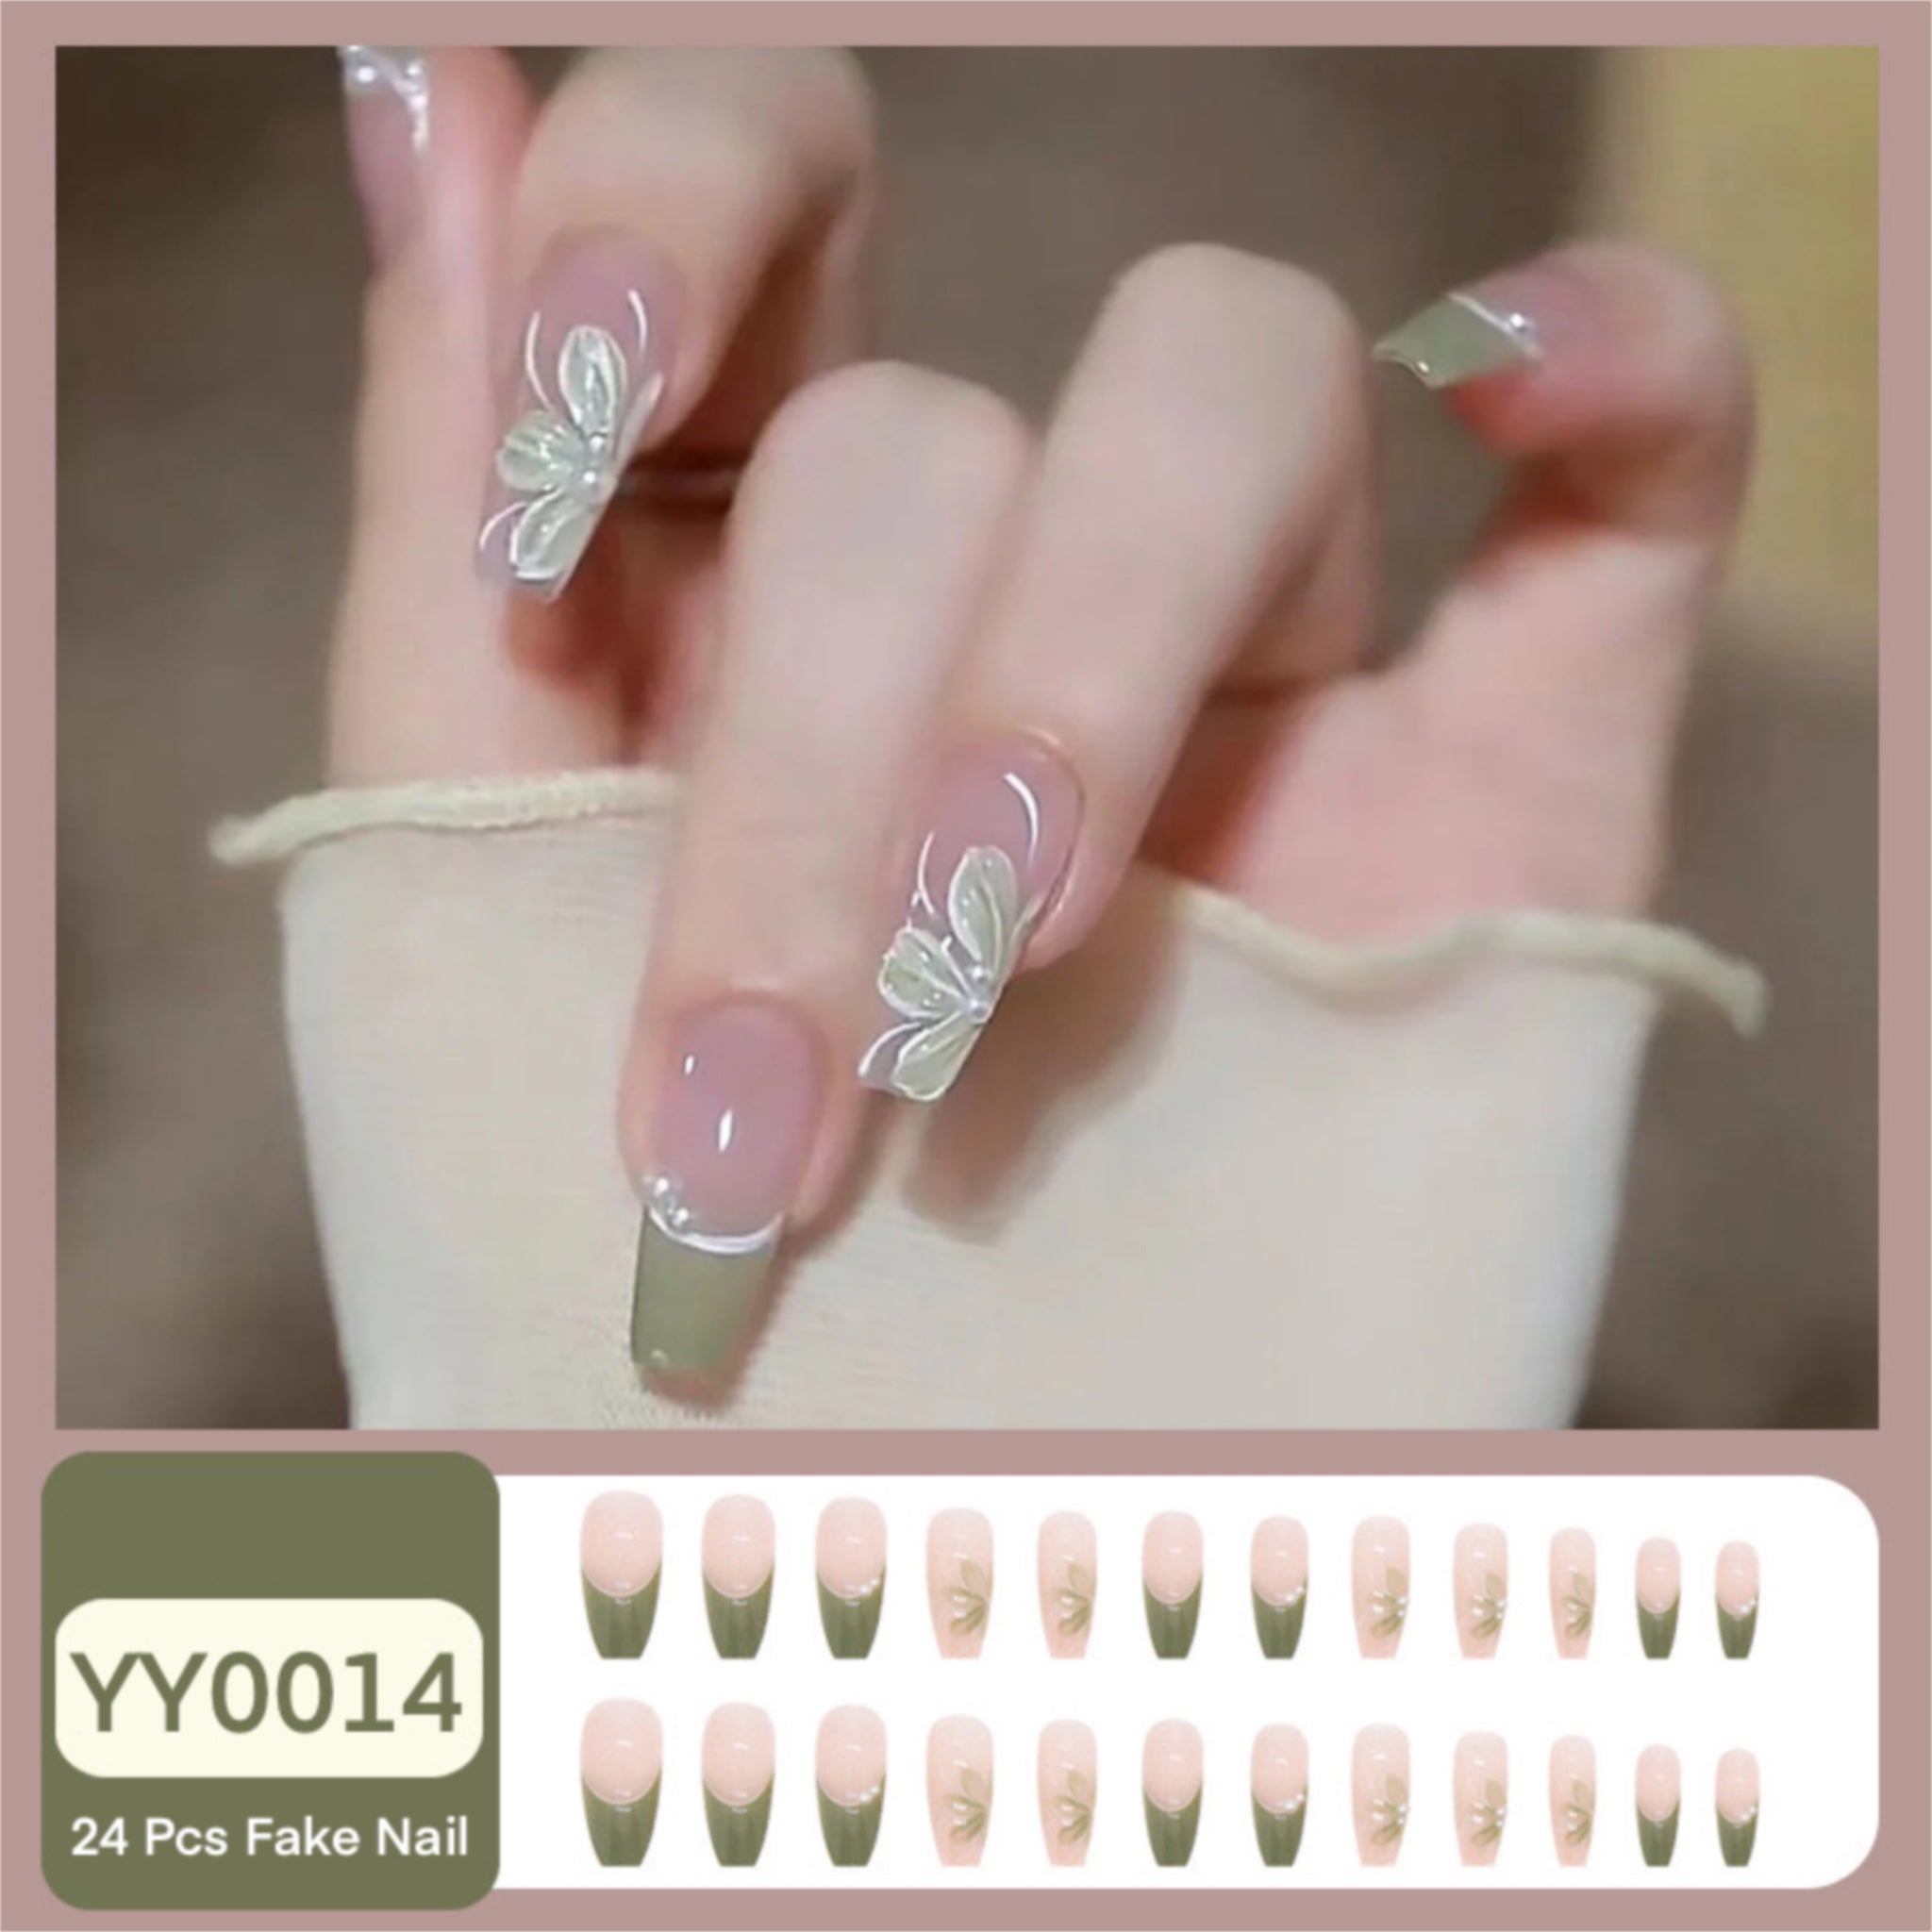 24pcs fake nails with design manicure press on nails